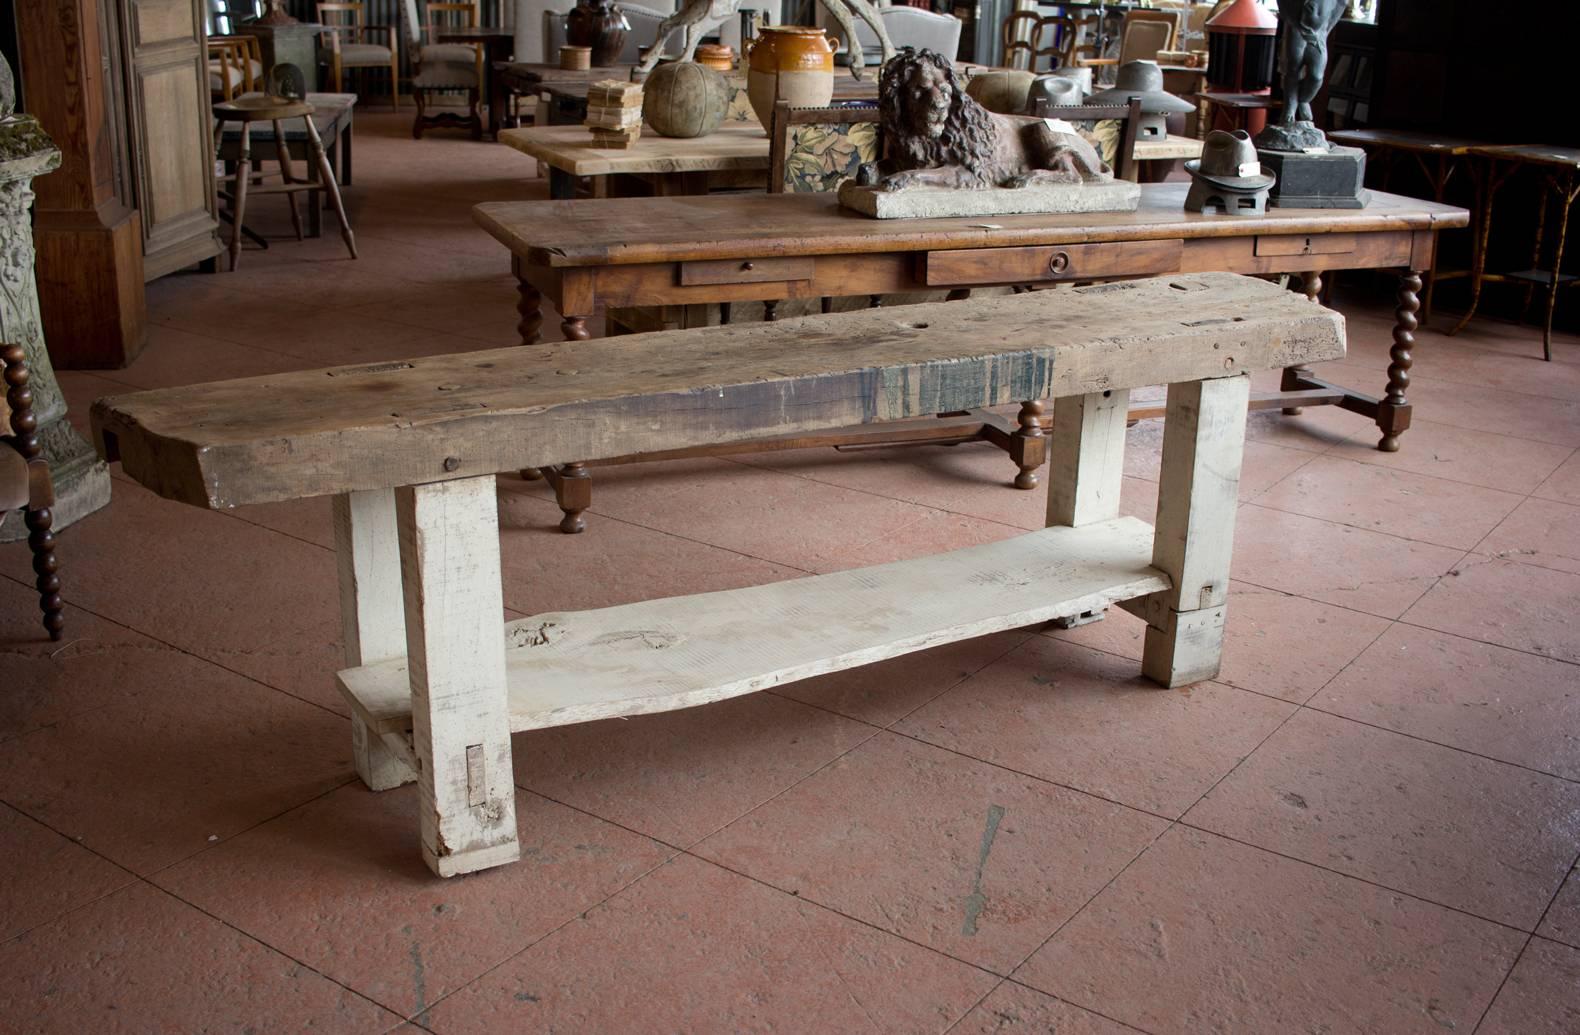 Wonderful substantial 19th century French workbench with a live edge shelf.